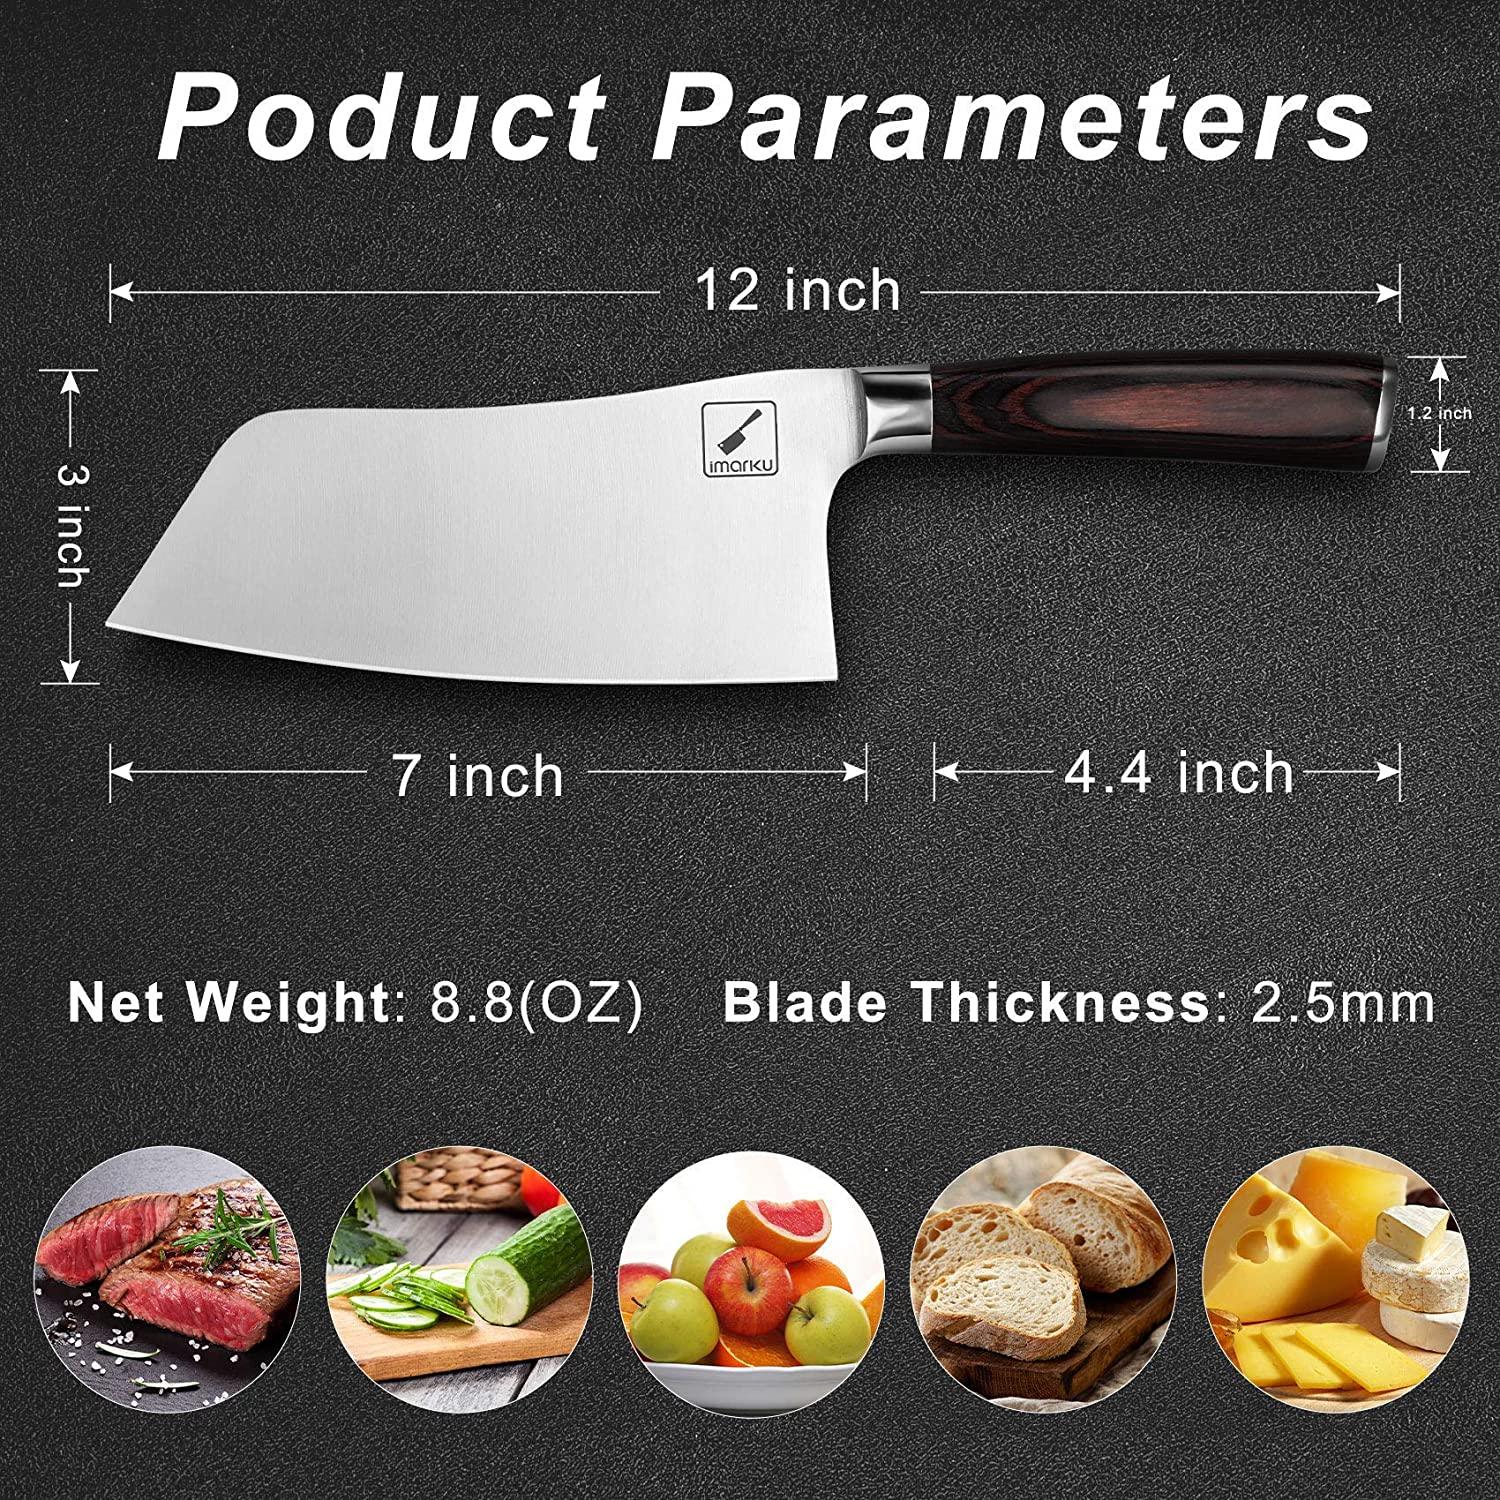 imarku Cleaver Knife 7 inch Meat Cleaver - SUS440A Japan High Carbon Stainless Steel Butcher Knife with Ergonomic Handle, Ultra Sharp, Useful